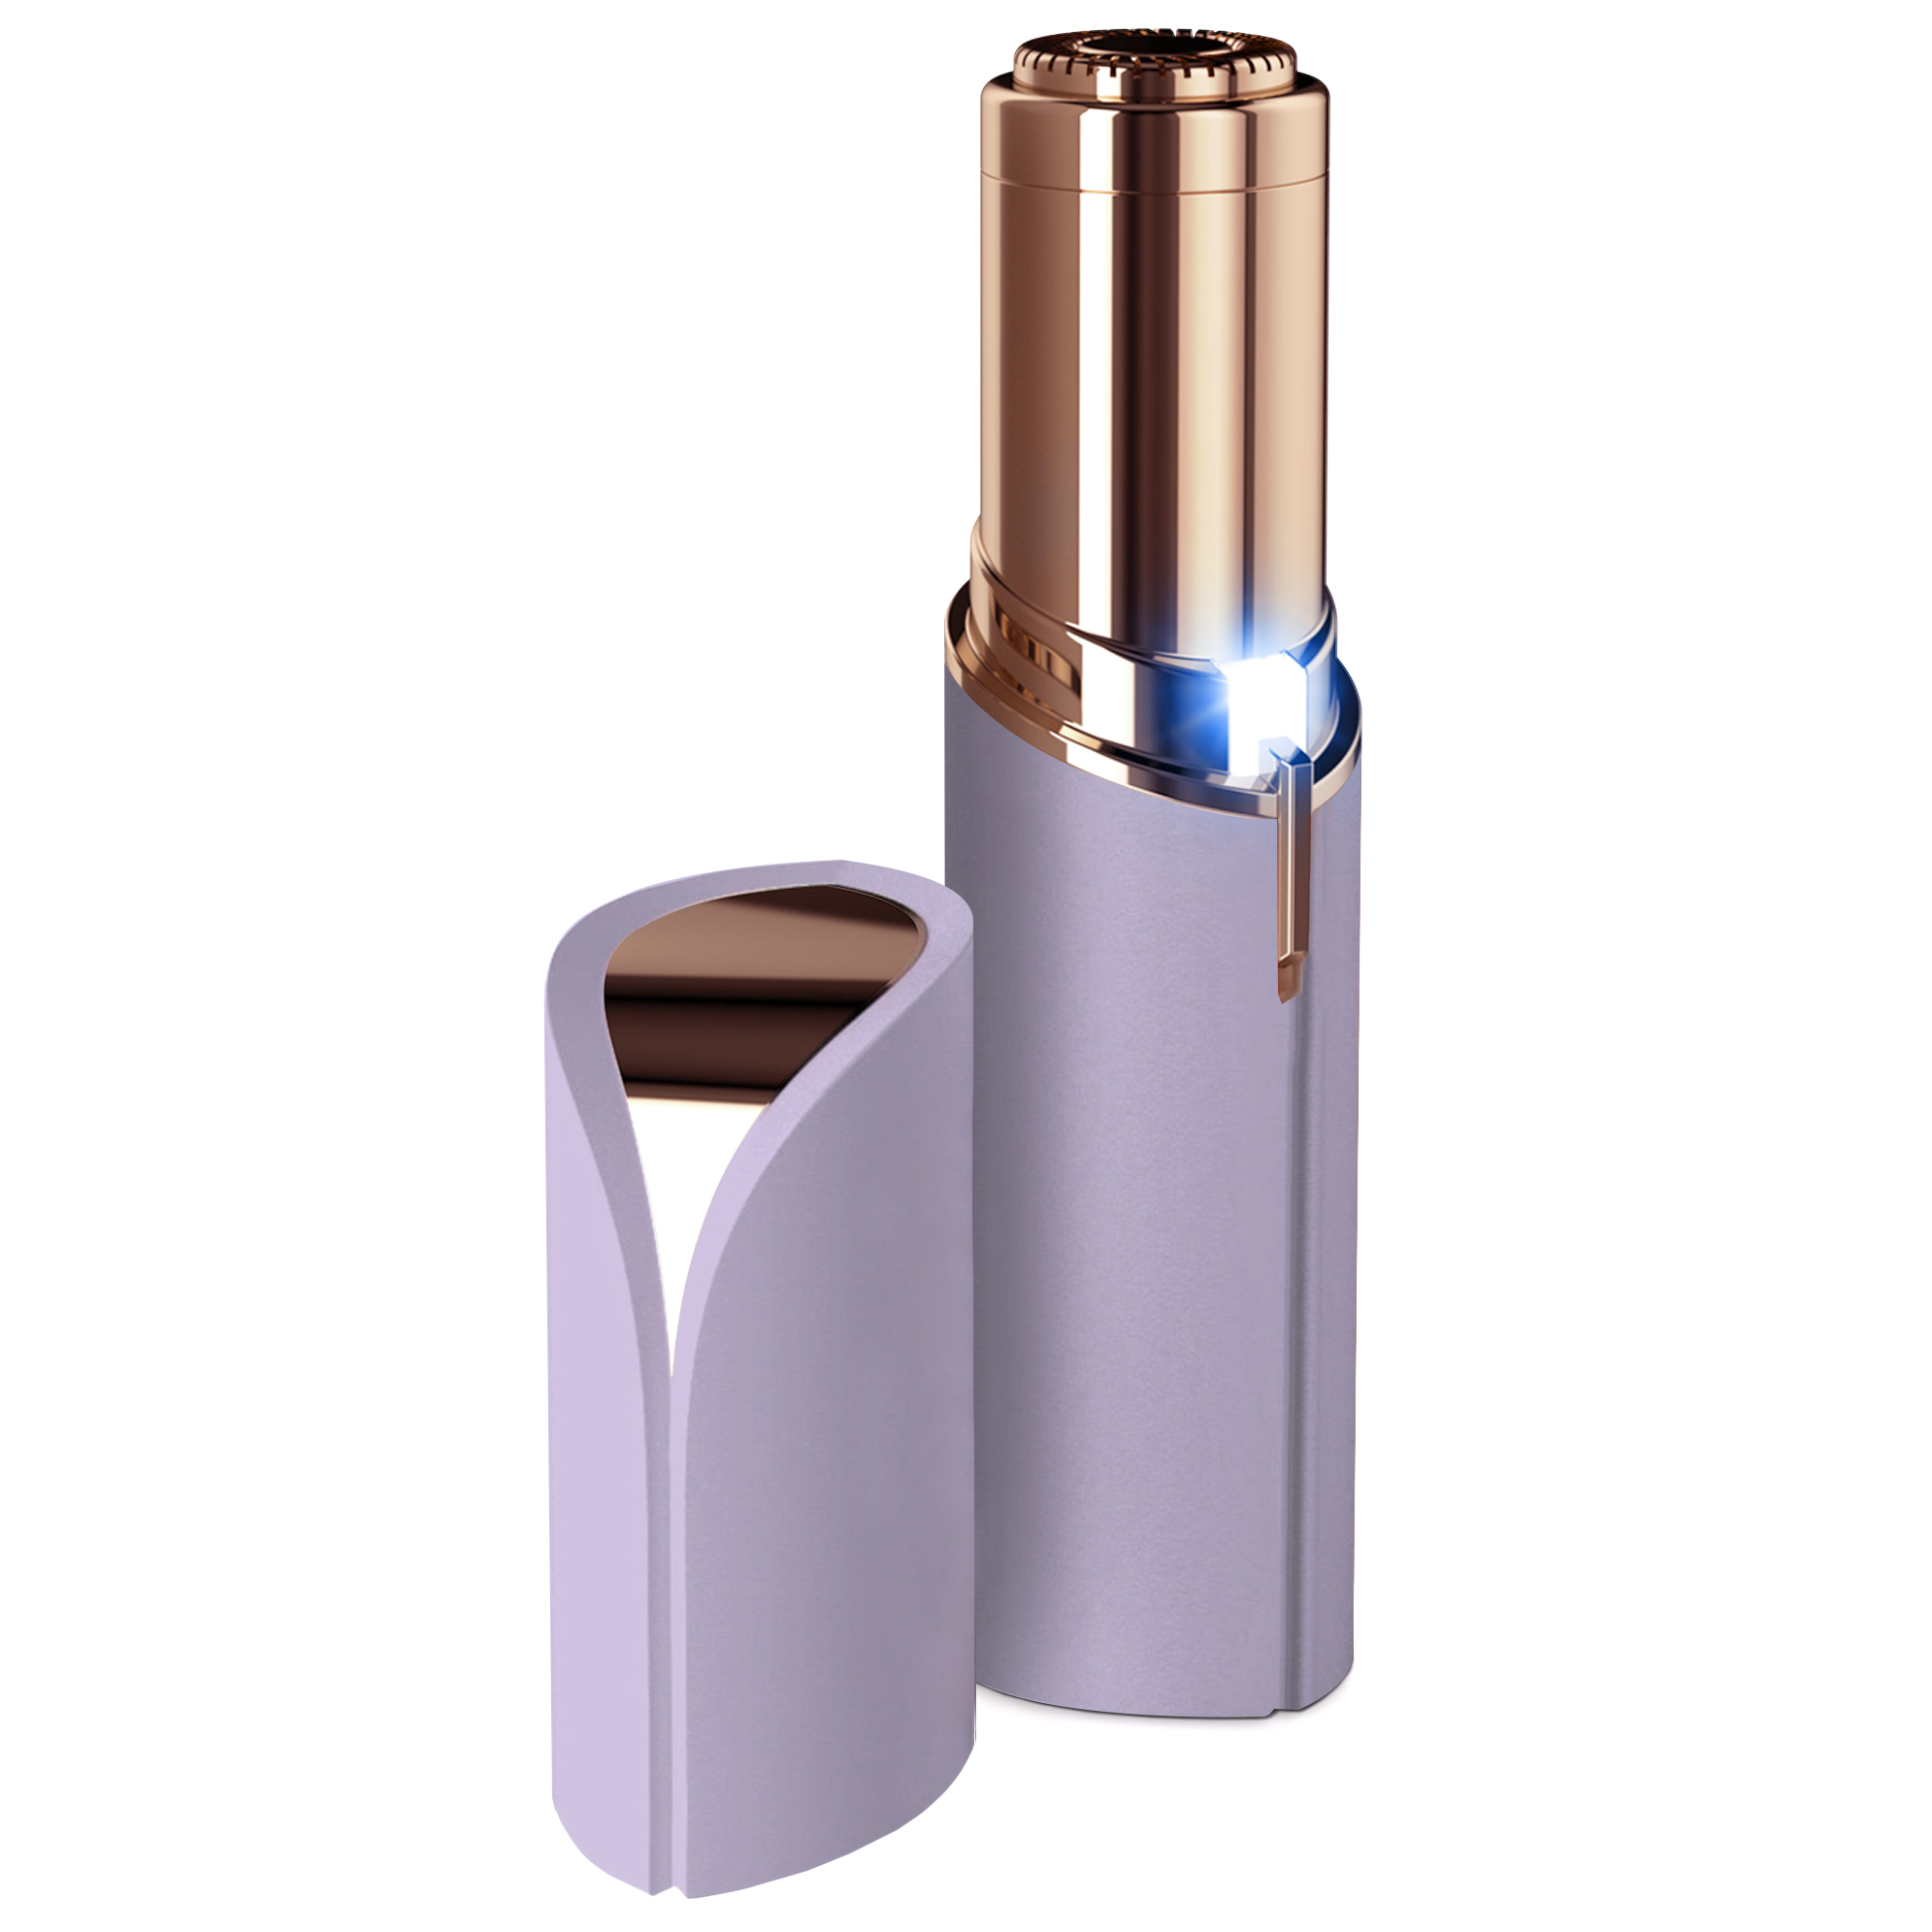 Finishing Touch Flawless, Original Facial Hair Remover, 18K Gold Plated, Lavender, As Seen on TV - image 1 of 12